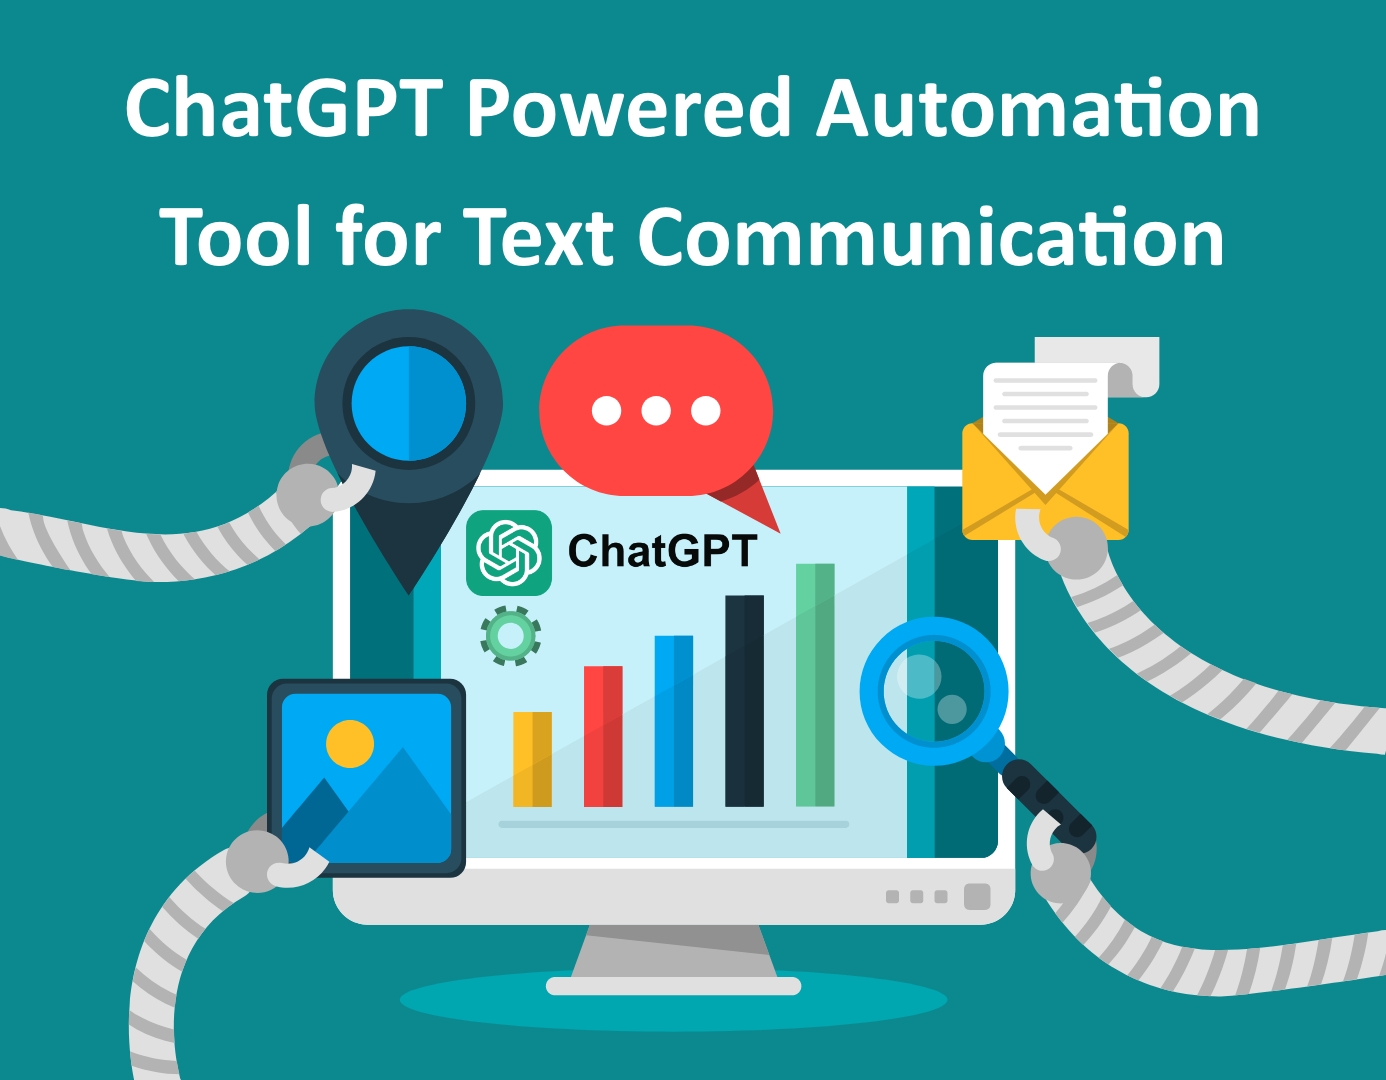 ChatGPT Powered Automation Tool for Text Communication